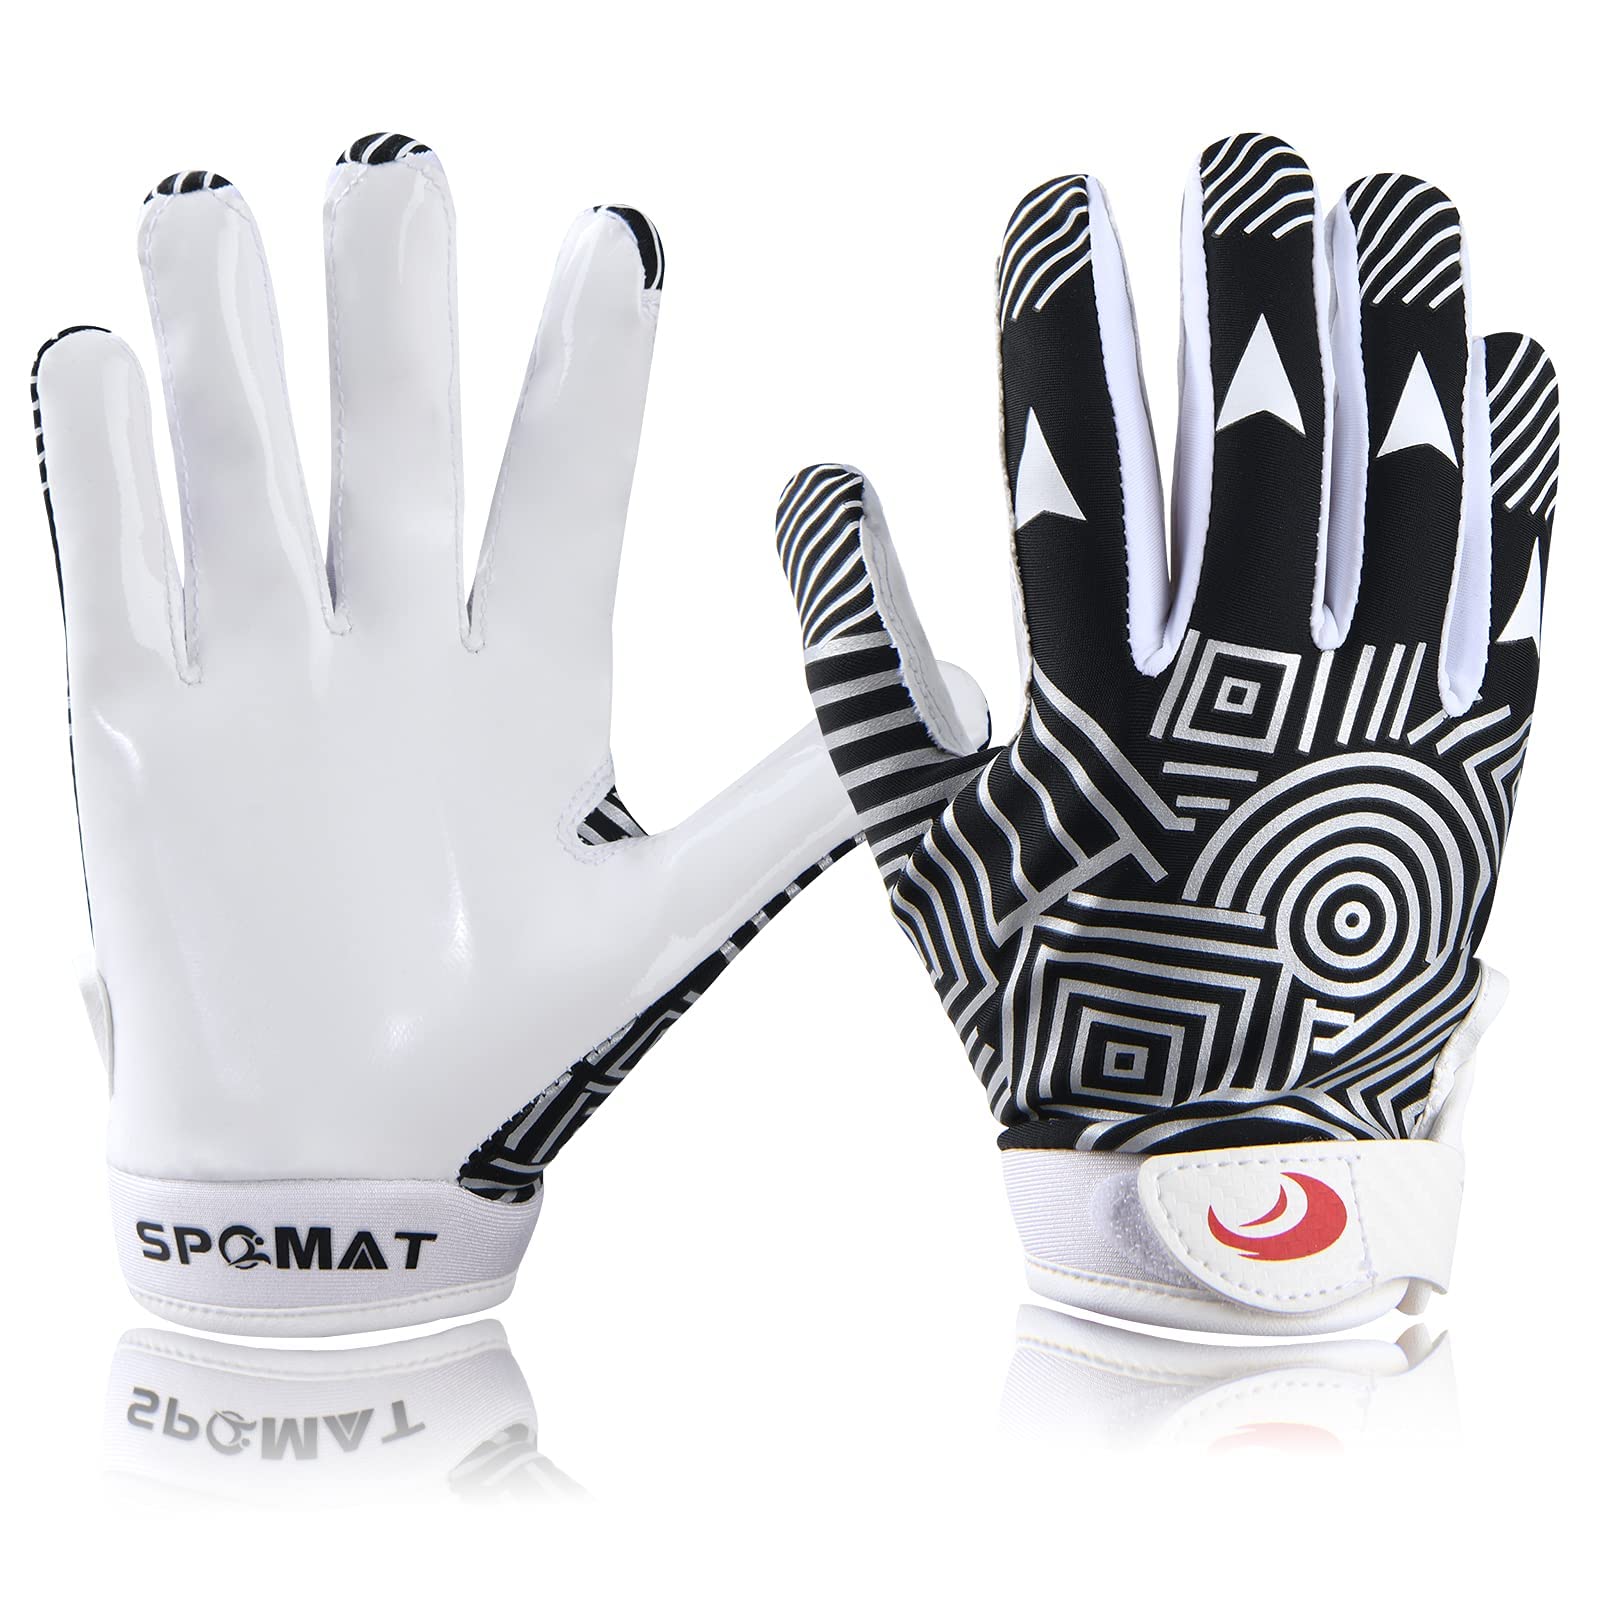 SPOMAT Youth Football Gloves Kids Silicone Grip Receiver Gloves for Kids with Super Stick Ability for Best Game Experience